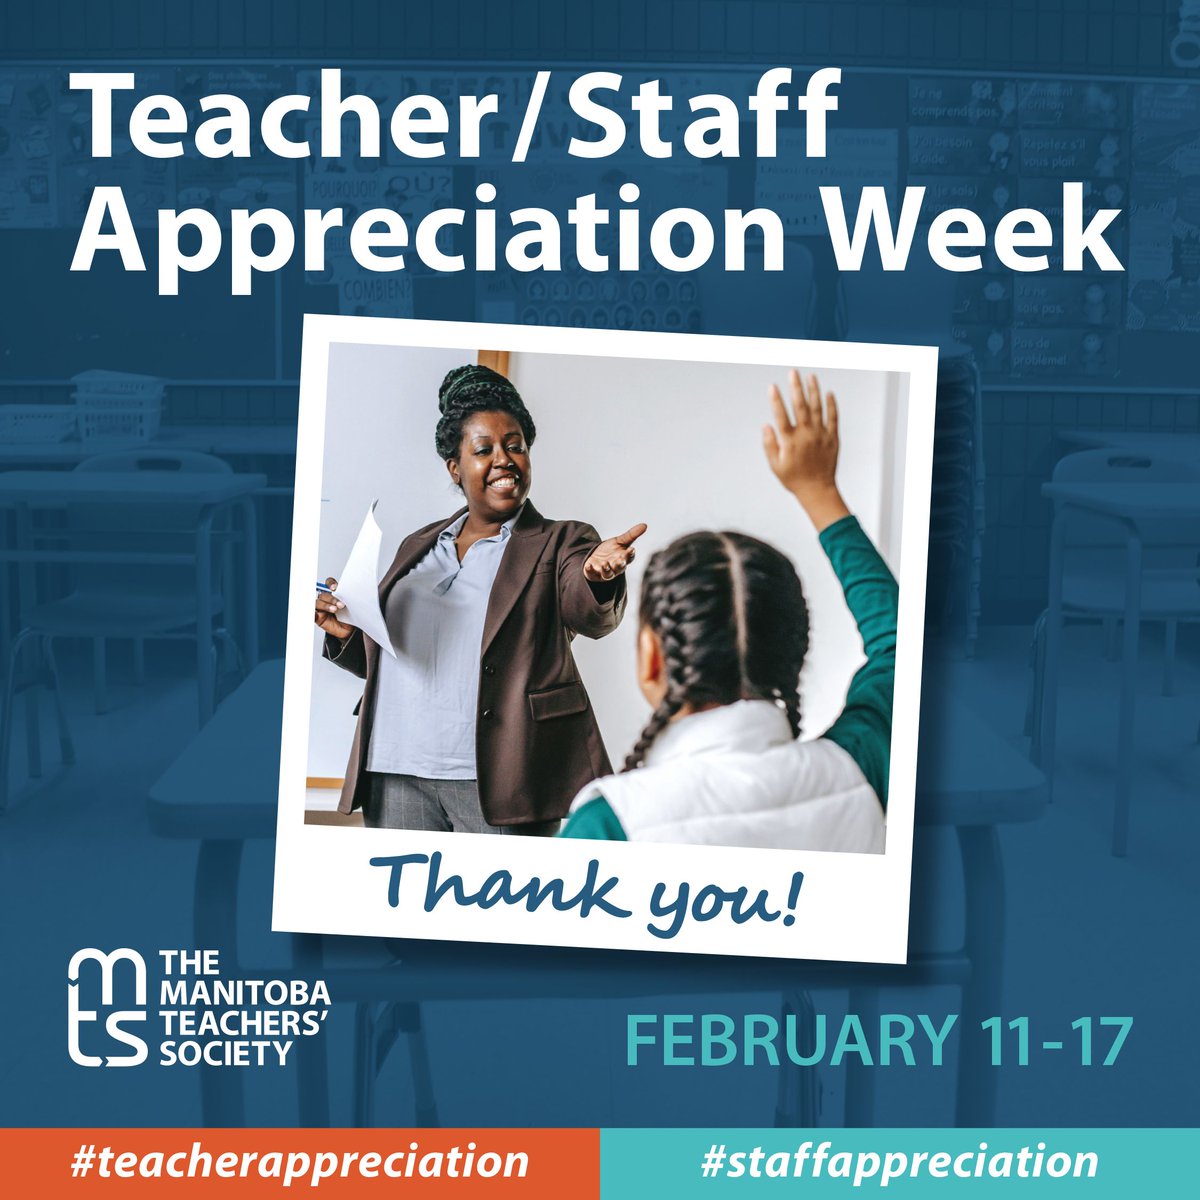 Teacher/Staff Appreciation Week is February 11 to 17. Celebrate by sharing your favourite teacher stories on social media using the hashtags #TeacherAppreciation #StaffAppreciation #TeacherAppreciationWeek